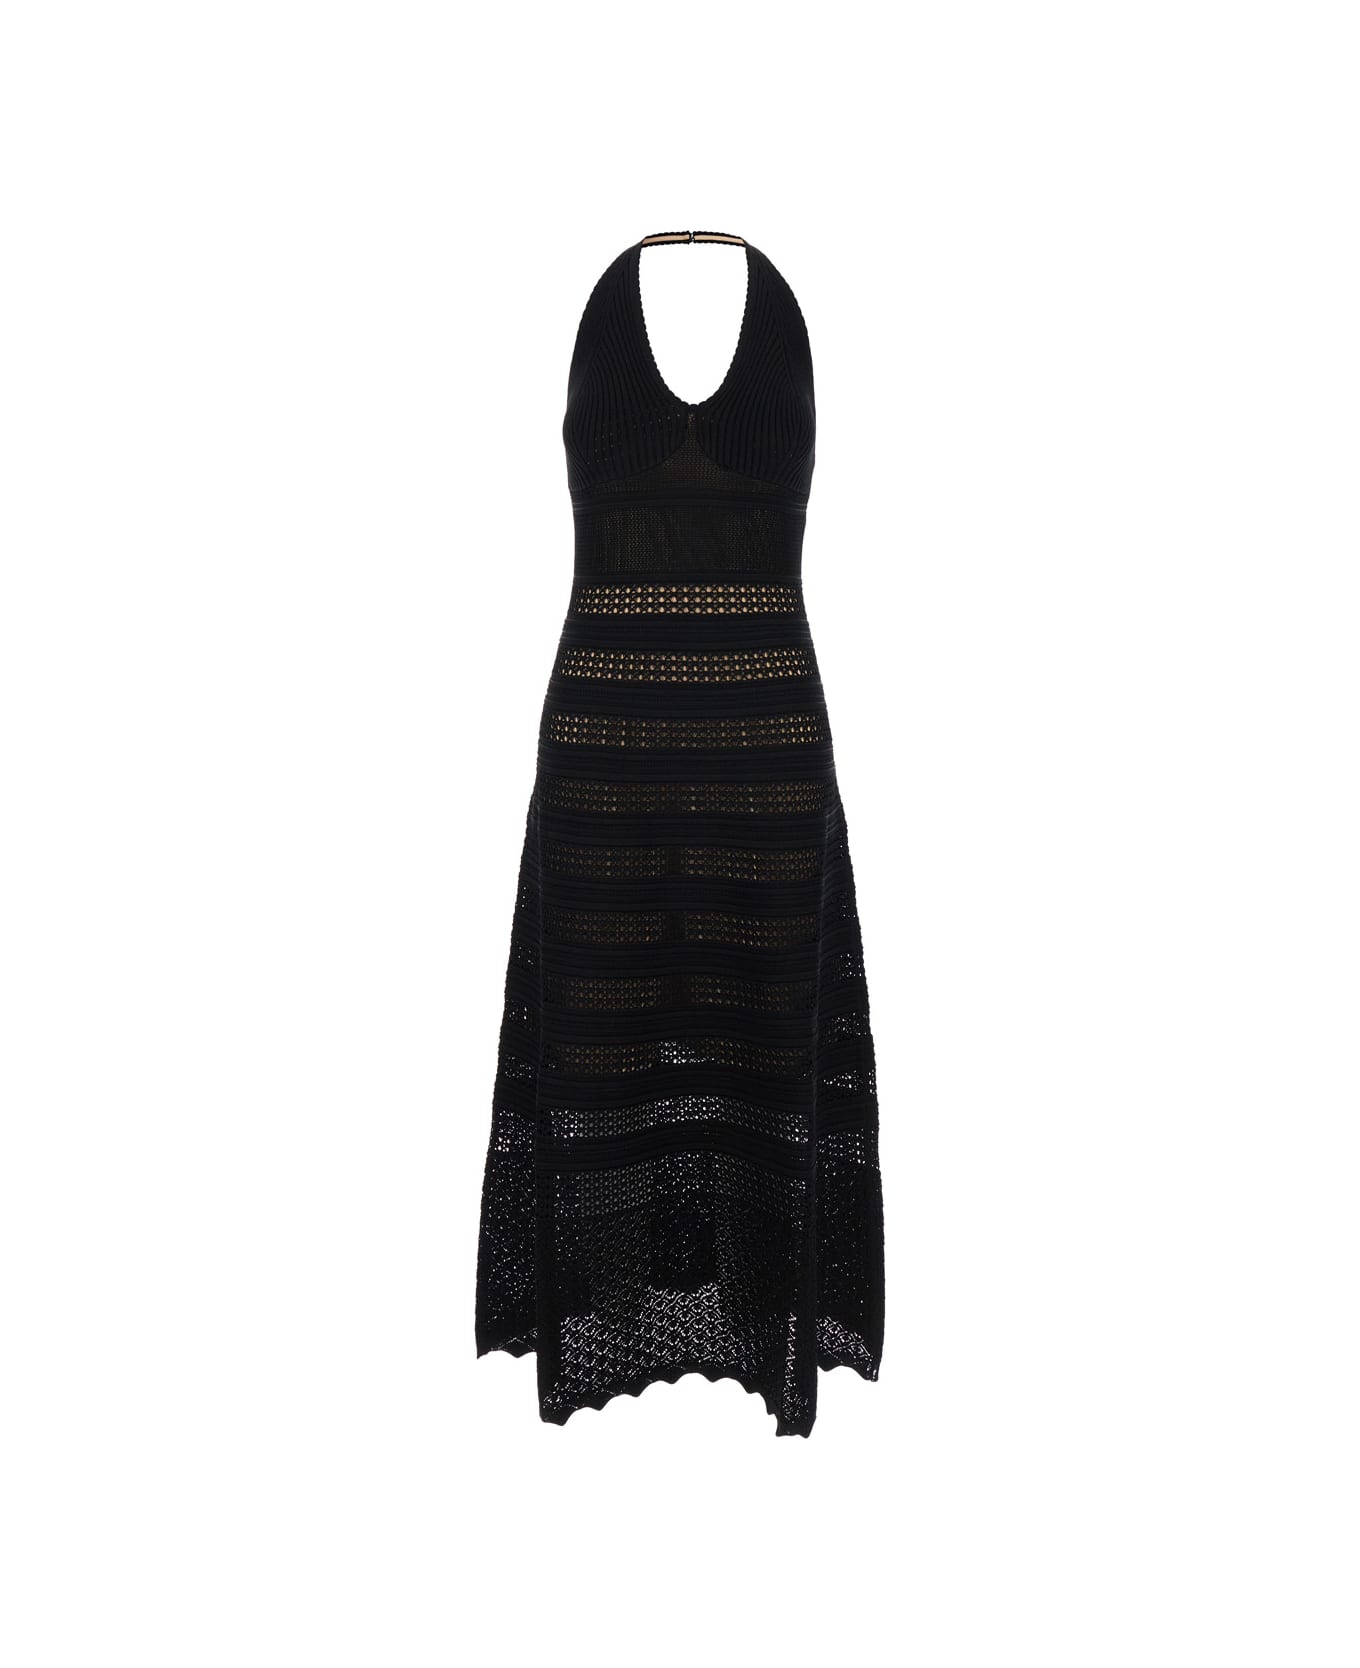 TwinSet Long Black Perforated Dress With Halterneck In Viscose Blend Woman - Black